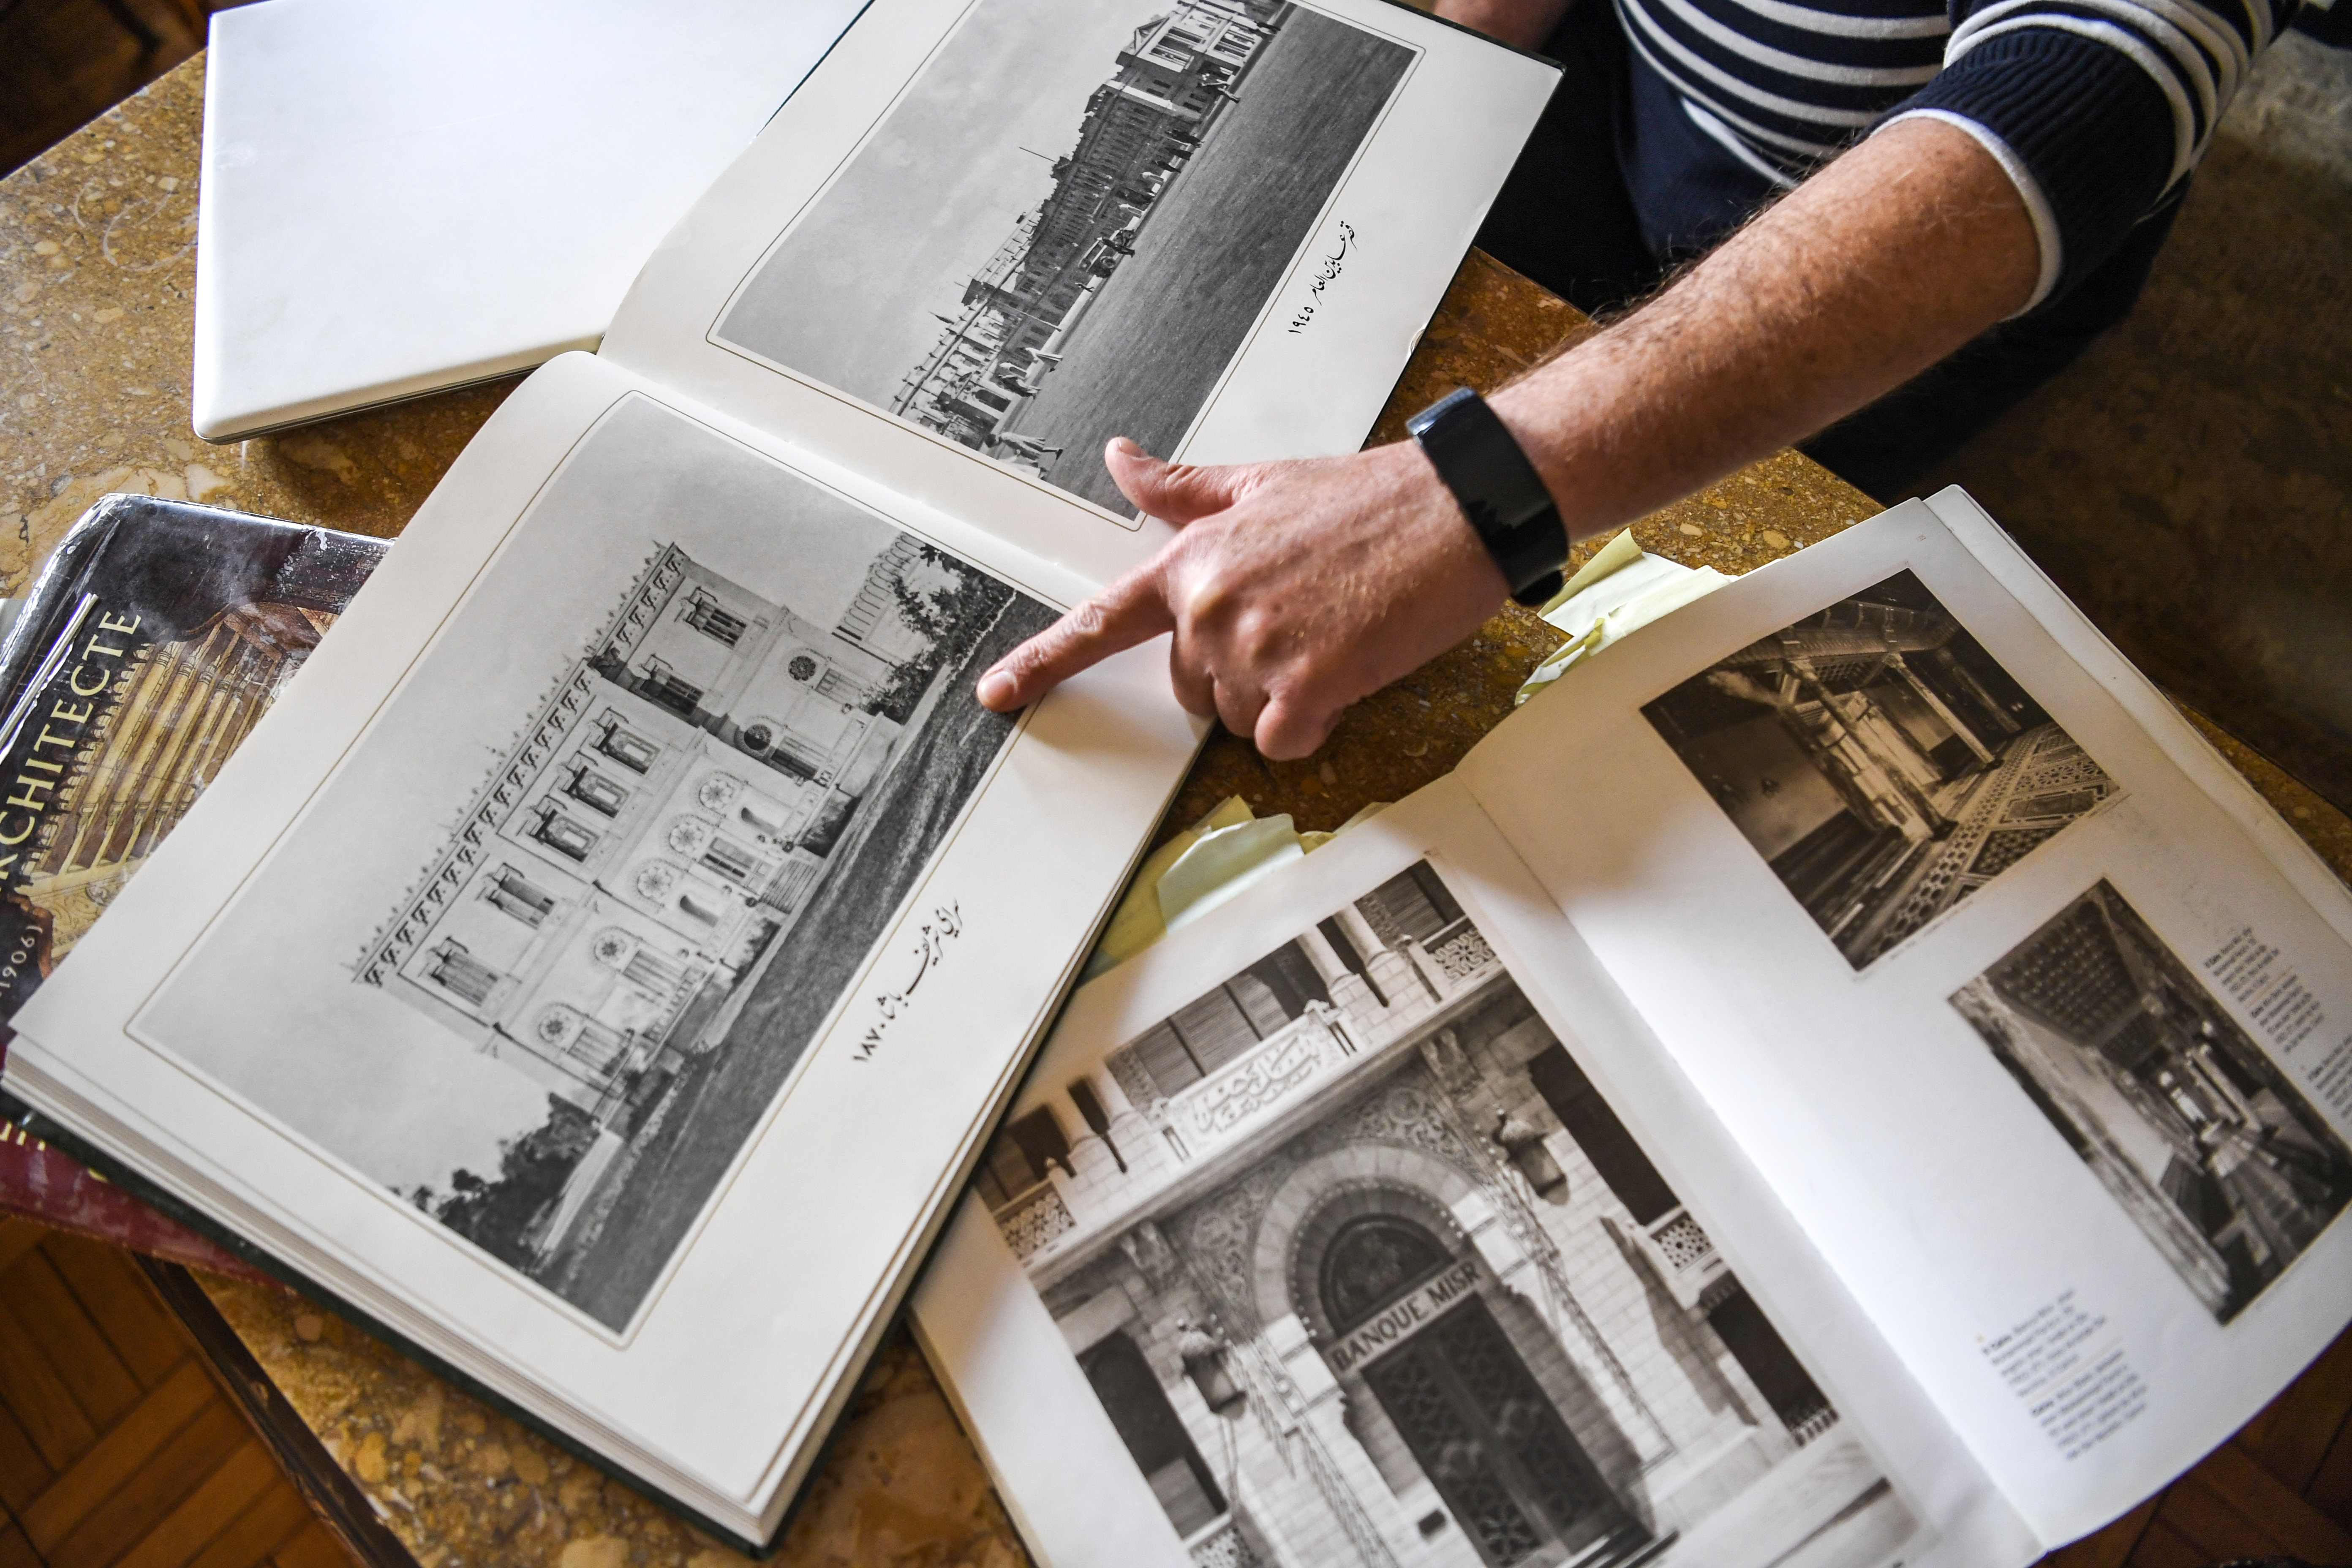 Ahmed al-Bindari, an Egyptian historian and photographer of modern (19th-20th century) Cairene architecture, points at an architecture catalogue showing the historic Sherif Pasha Serail (dating to 1870), during an interview at his office in the capital Cairo on March 8, 2019.